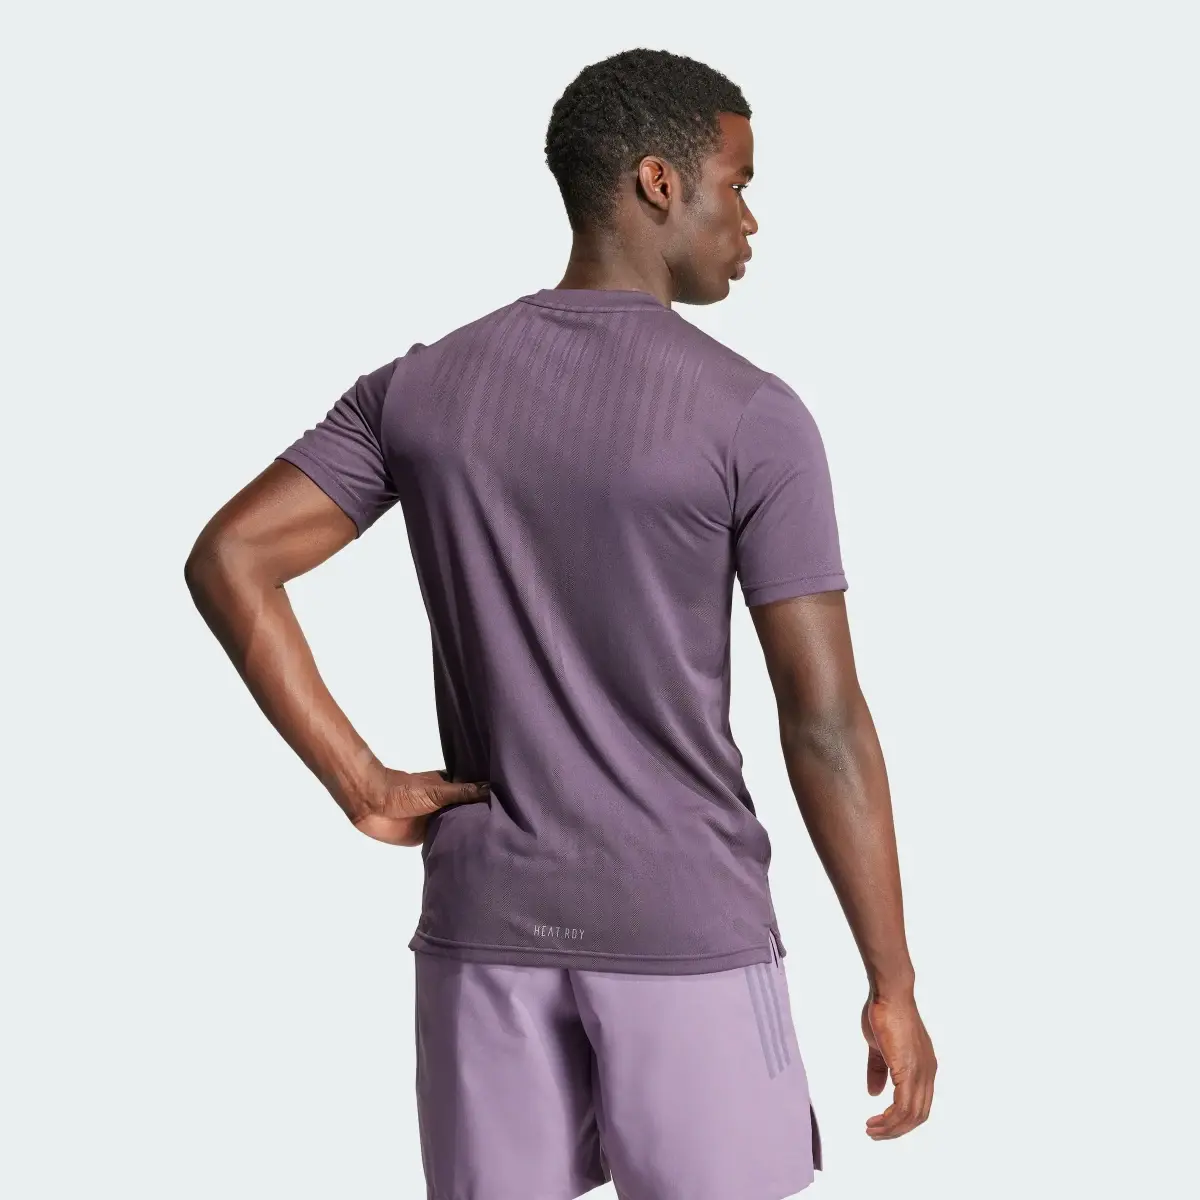 Adidas HIIT Airchill Workout Tee. 3